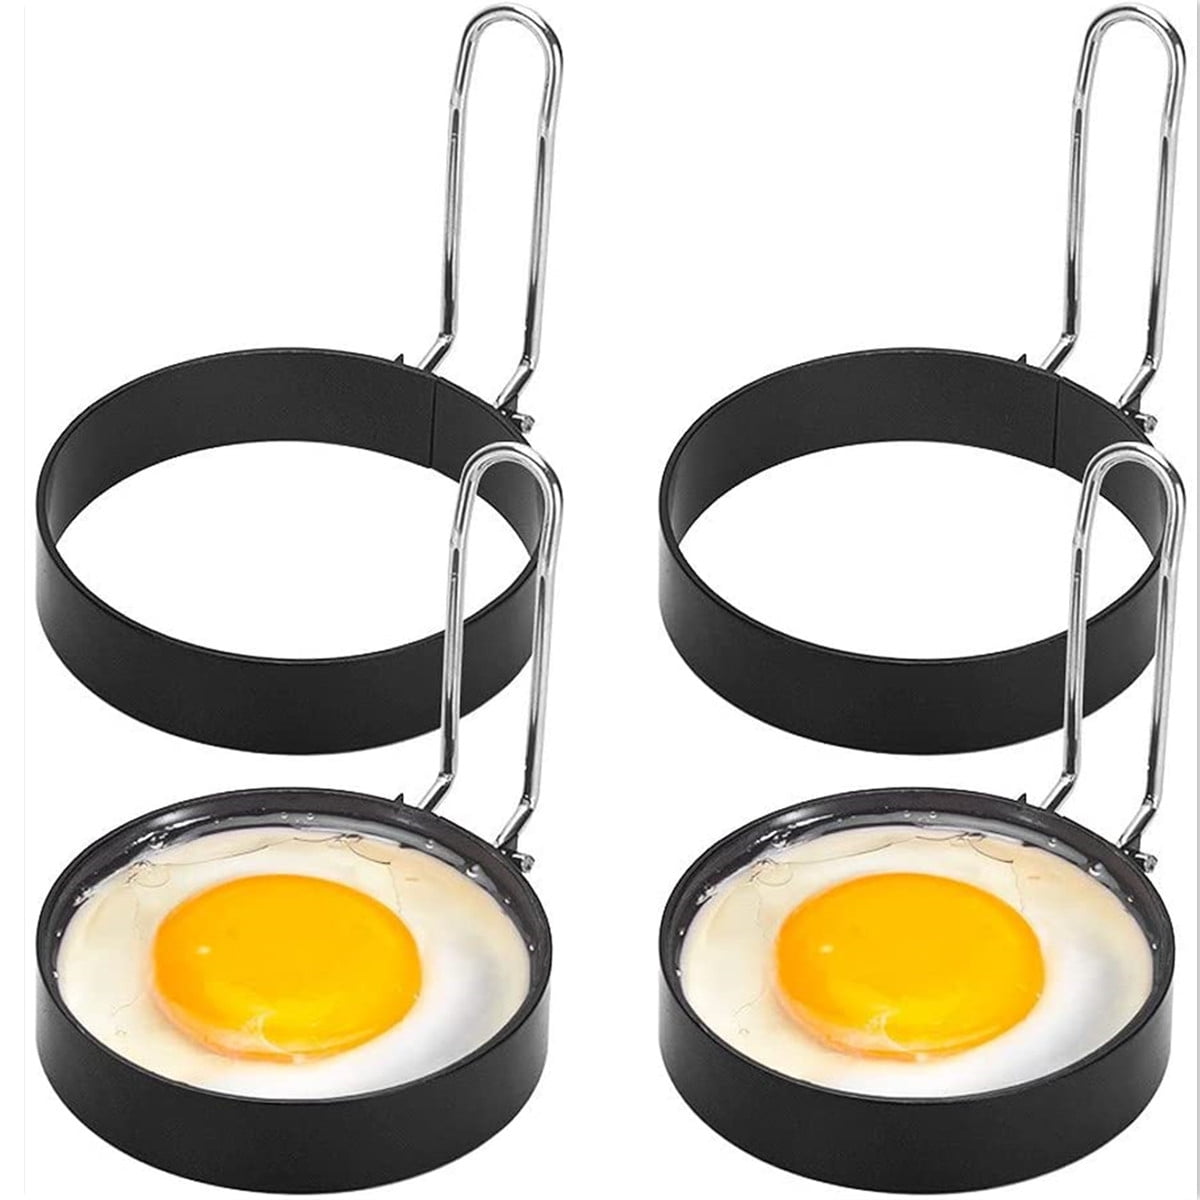 1//4Pcs Kitchen Silicone Egg Fried Ring Round Mold Pancake Breakfast Cooking Tool